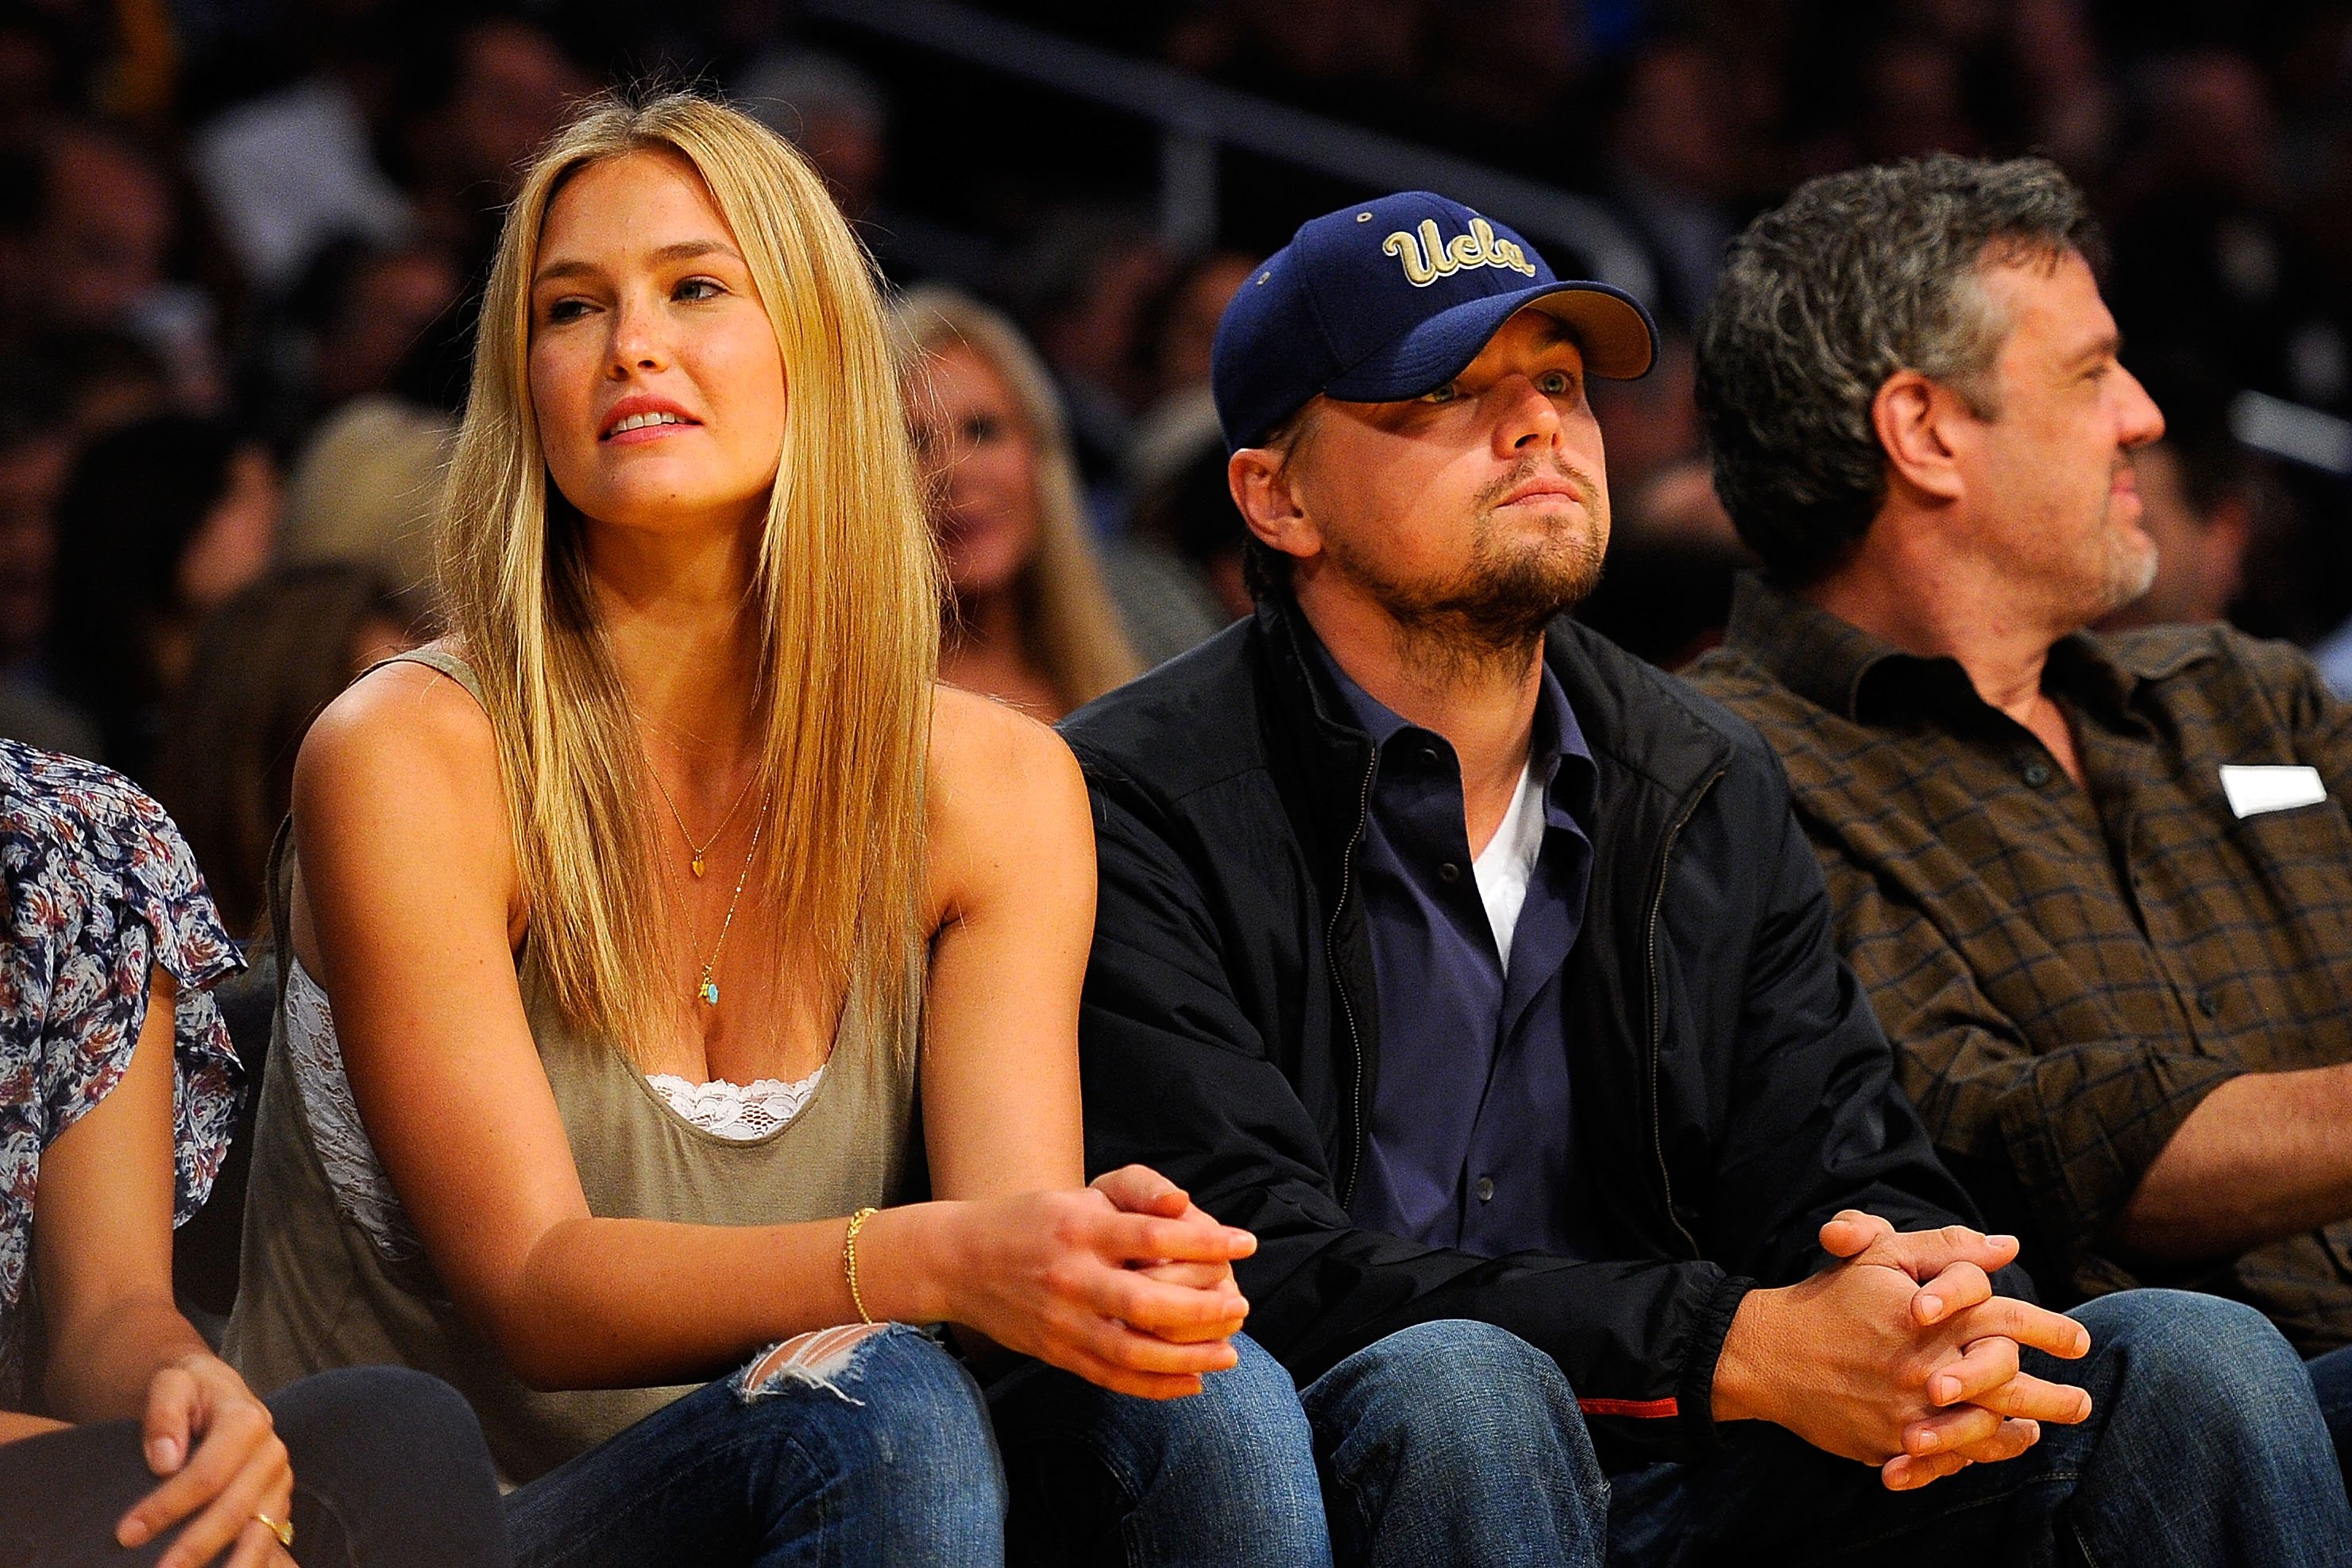 Bar Refaeli and Leonardo DiCaprio sit courtside during the Western Conference Quarterfinals of the NBA Playoffs on April 27, 2010, in Los Angeles, California | Source: Getty Images